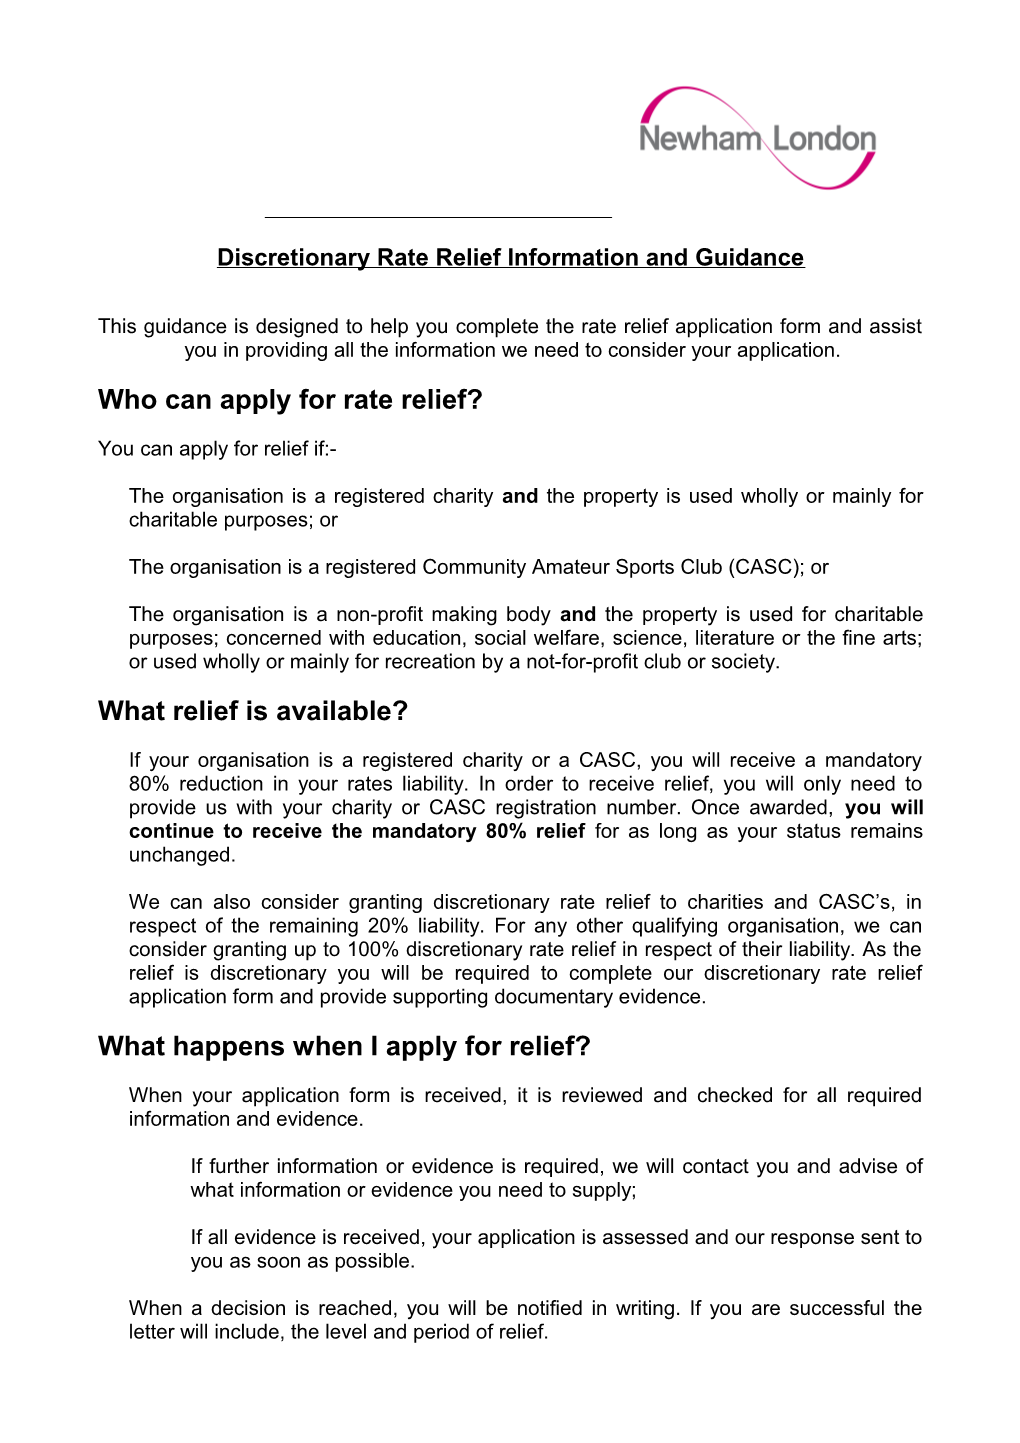 Discretionary Business Rate Relief for Non-Profit Organisations - Guidance Notes and Application